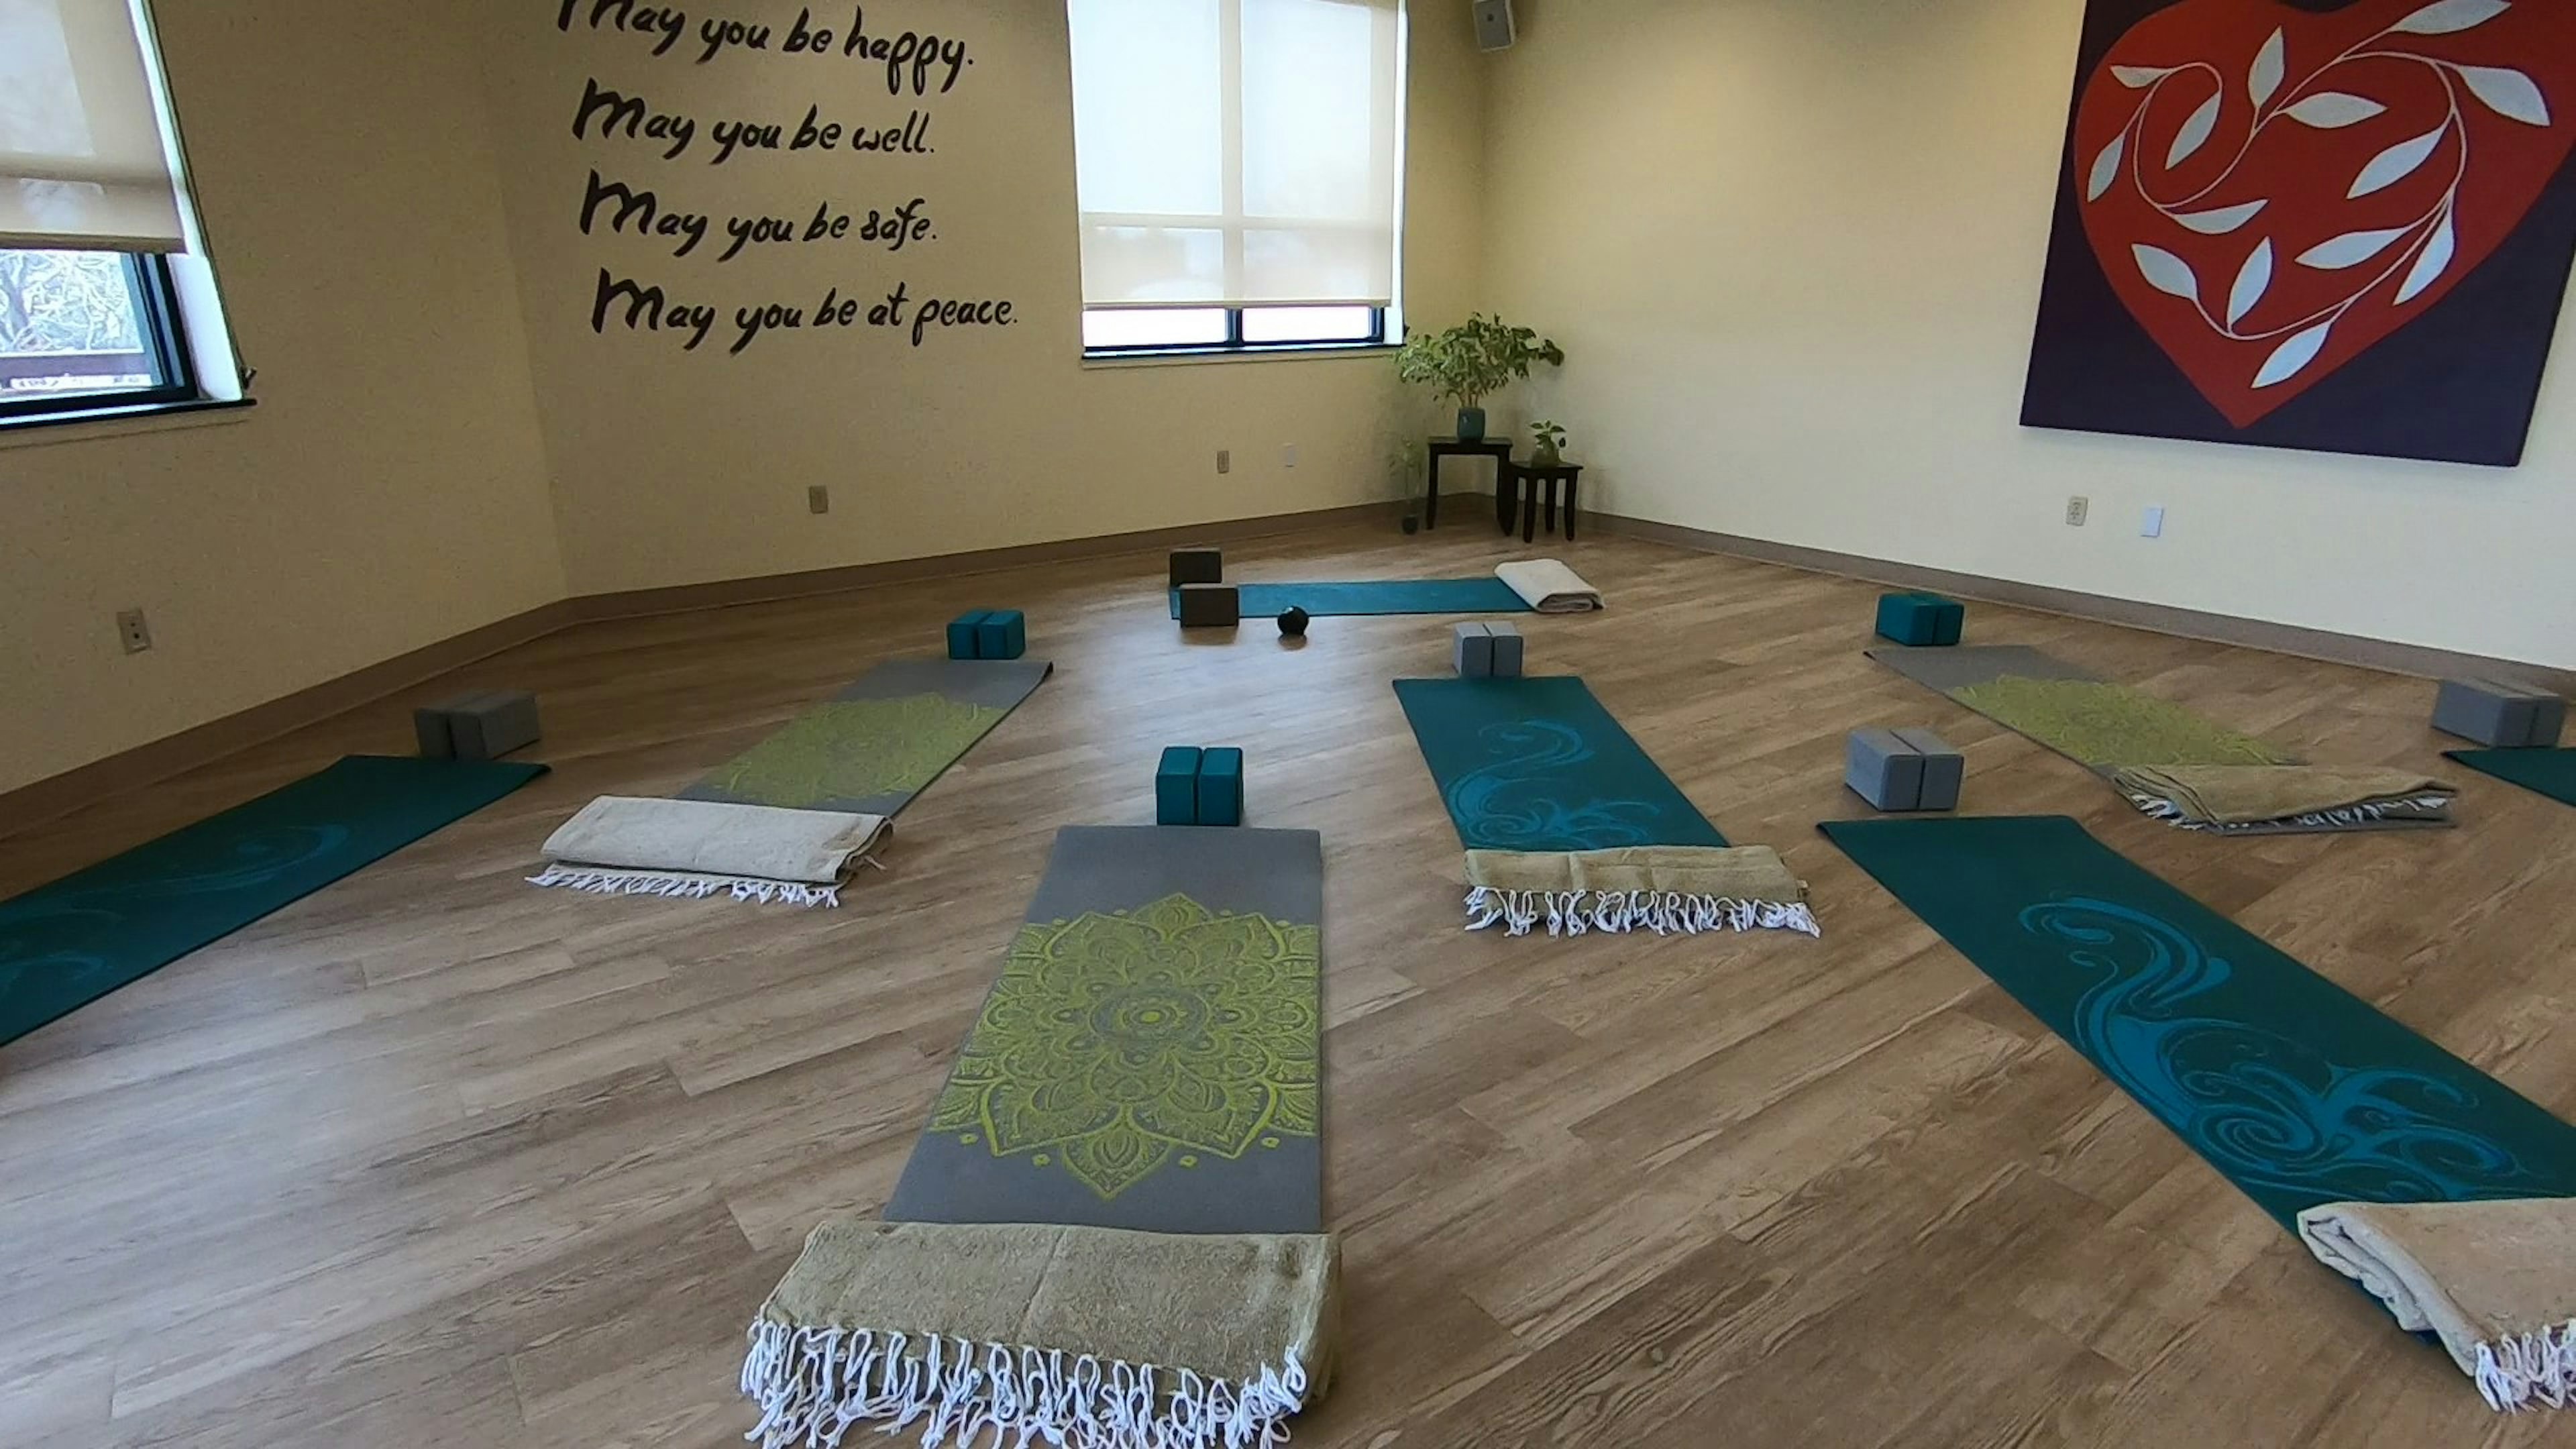 Yoga studio located on the second floor of Dixon. Yoga mats, blankets, and blocks set up. Writing on the wall that reads: May you be happy. May you be well. May you be safe. May you be at peace.